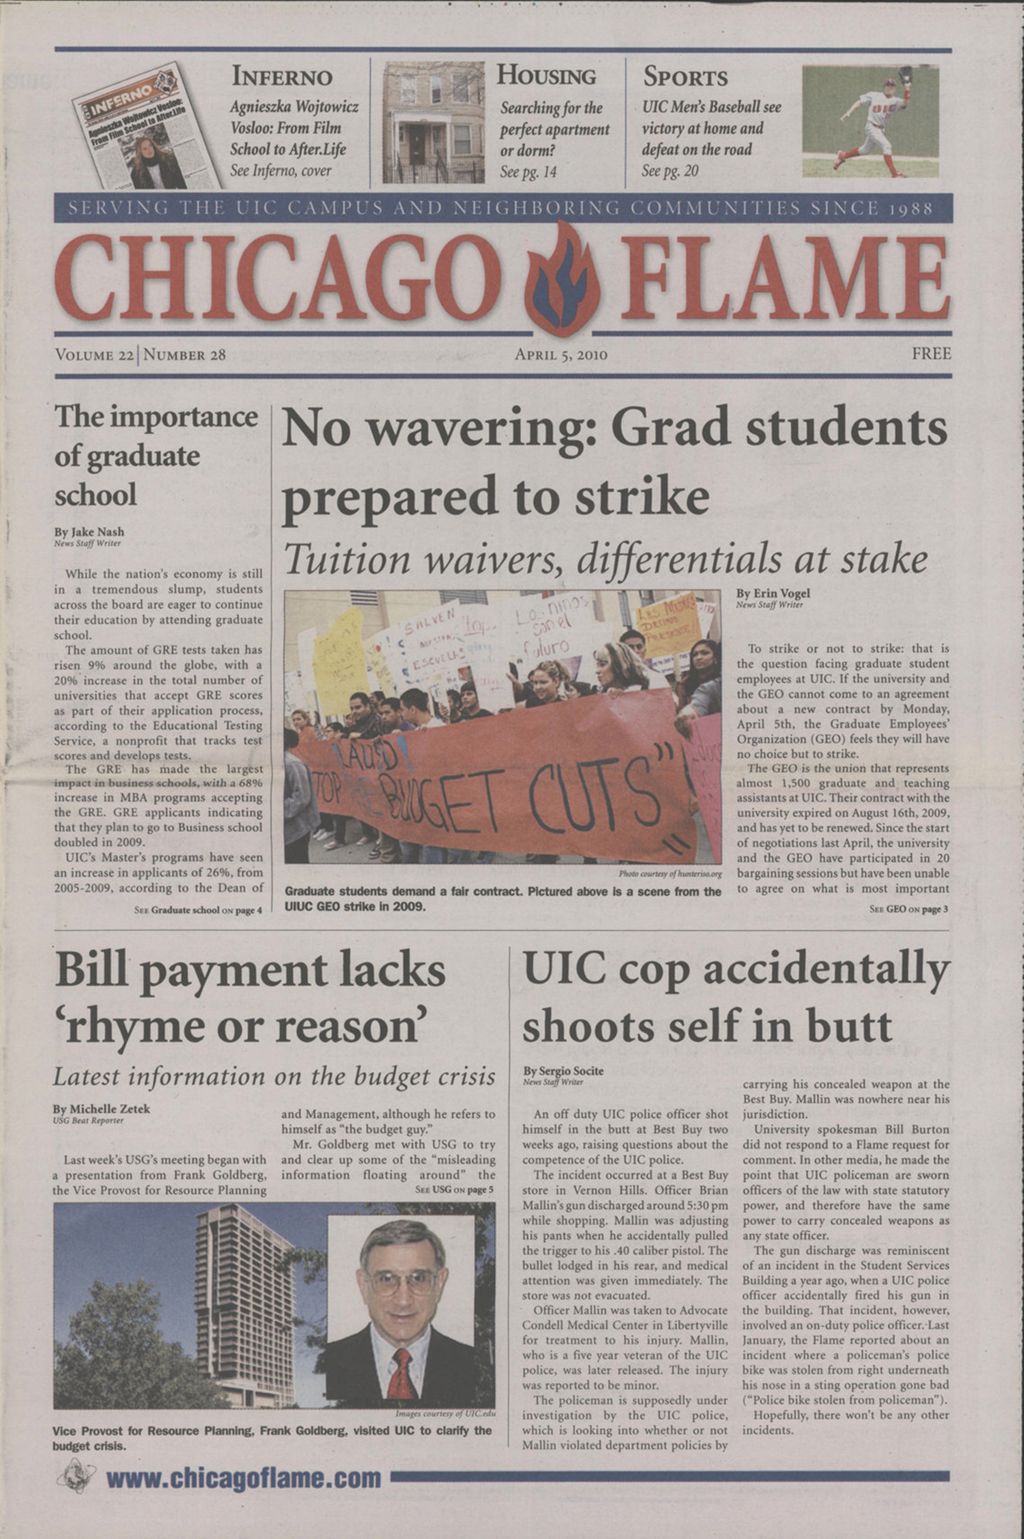 Miniature of Chicago Flame (April 5, 2010)